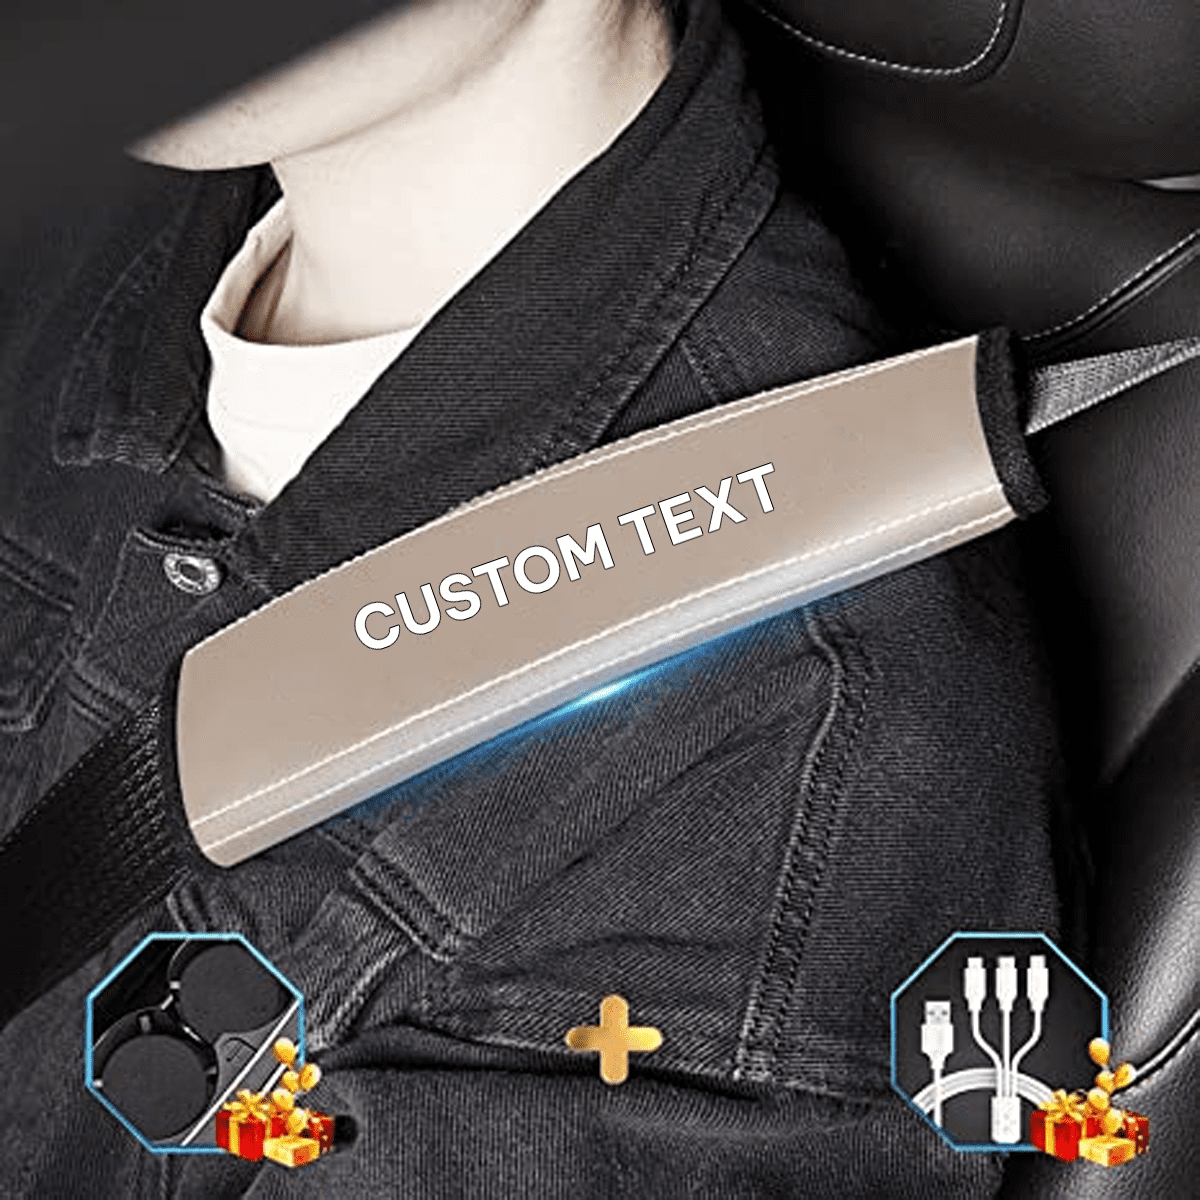 Custom Text and Logo Seat Belt Covers, Fit with Ford, Microfiber Leather Seat Belt Shoulder Pads for More Comfortable Driving, Set of 2pcs - Delicate Leather